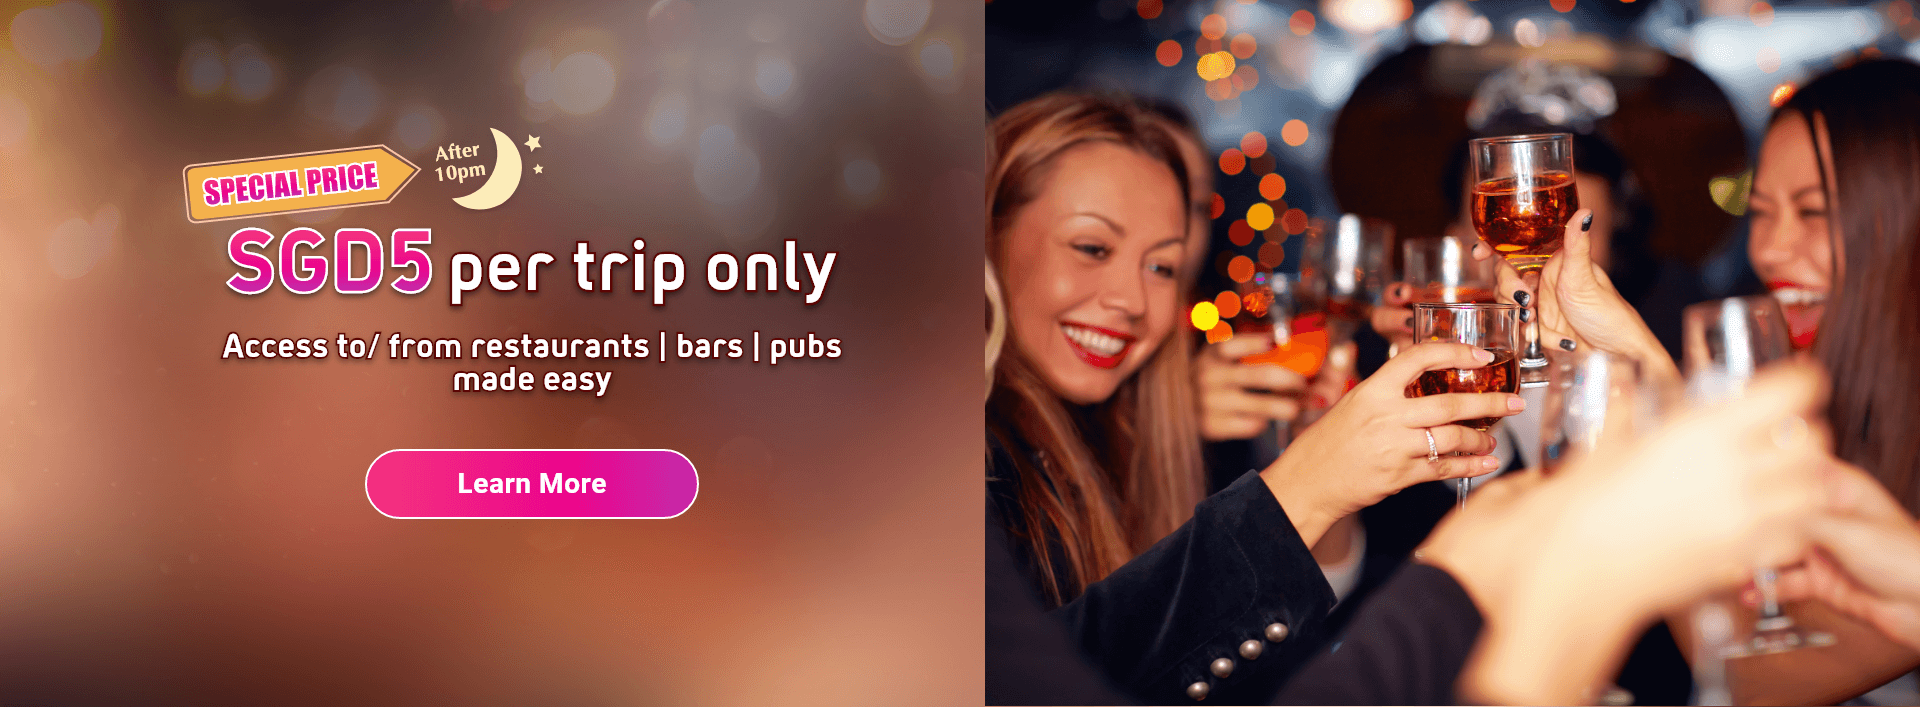 ON-DEMAND NIGHT SHUTTLE from Robertson Quay or Boat Quay